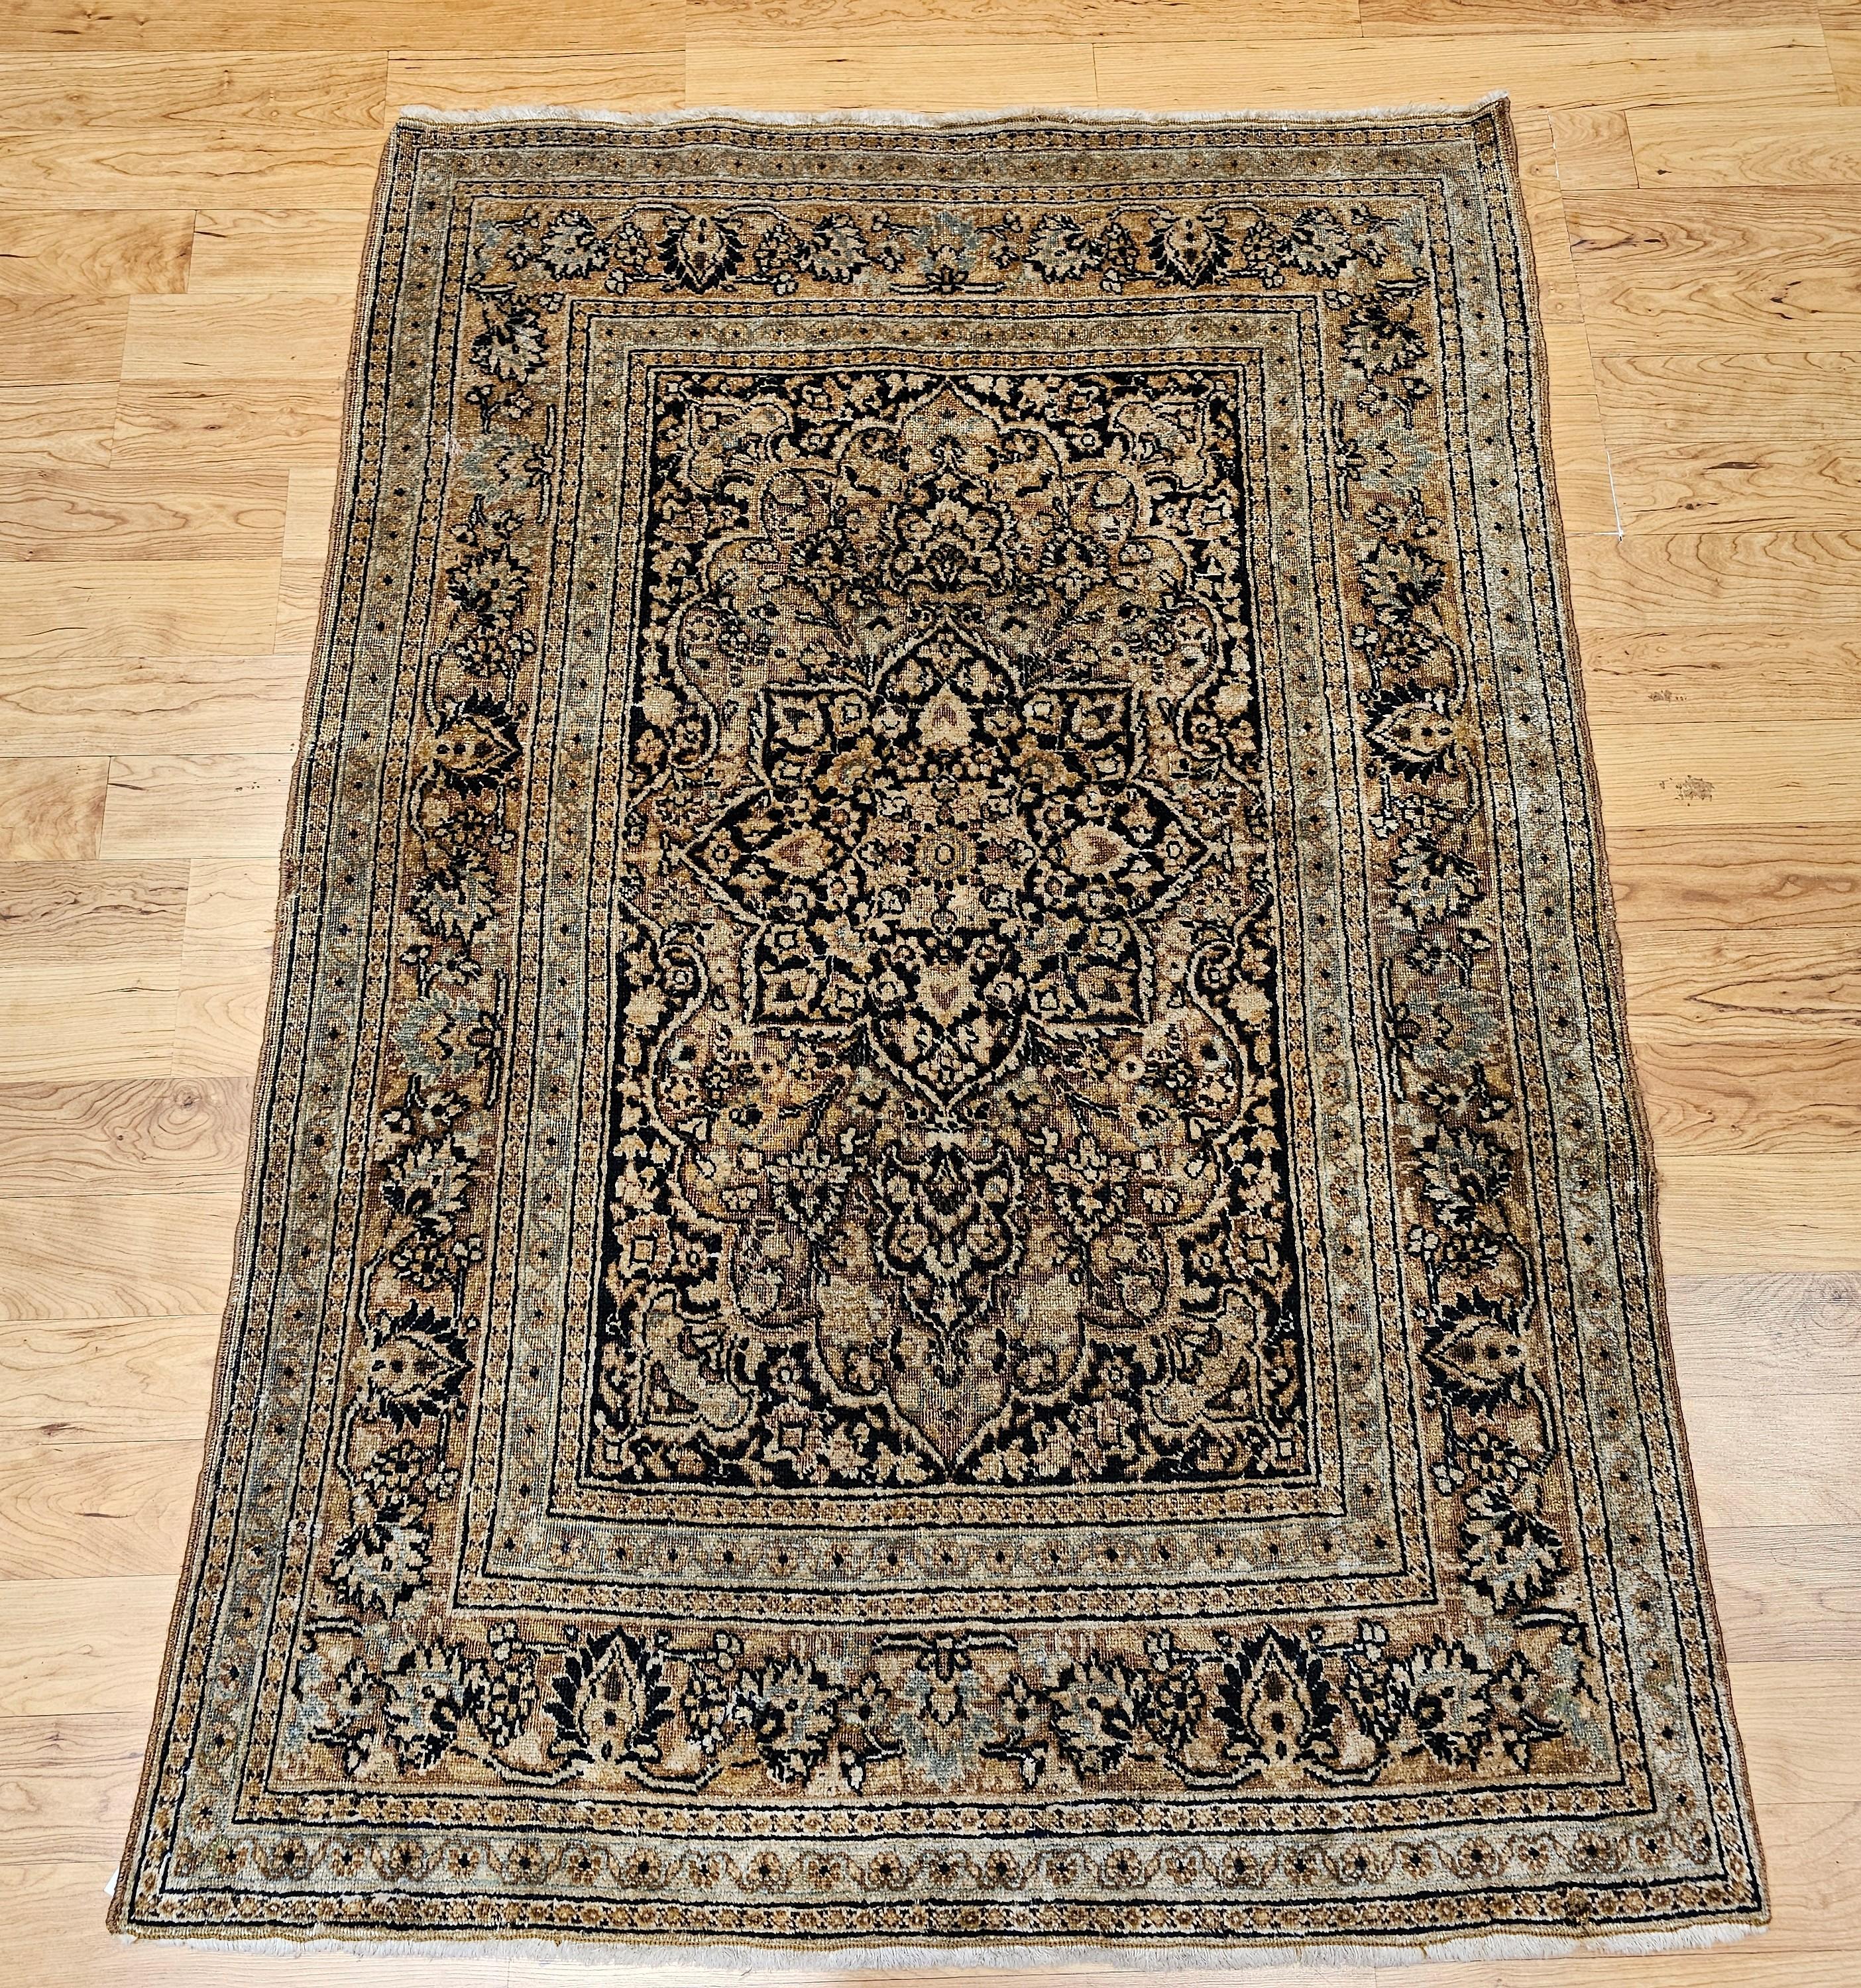 Wonderfully graceful and understatedly beauty is clearly visible in this fine weave vintage Persian Tabriz area rug in a medallion floral pattern from the early 1900s.  The Tabriz rug has a dark midnight blue/black background color with floral